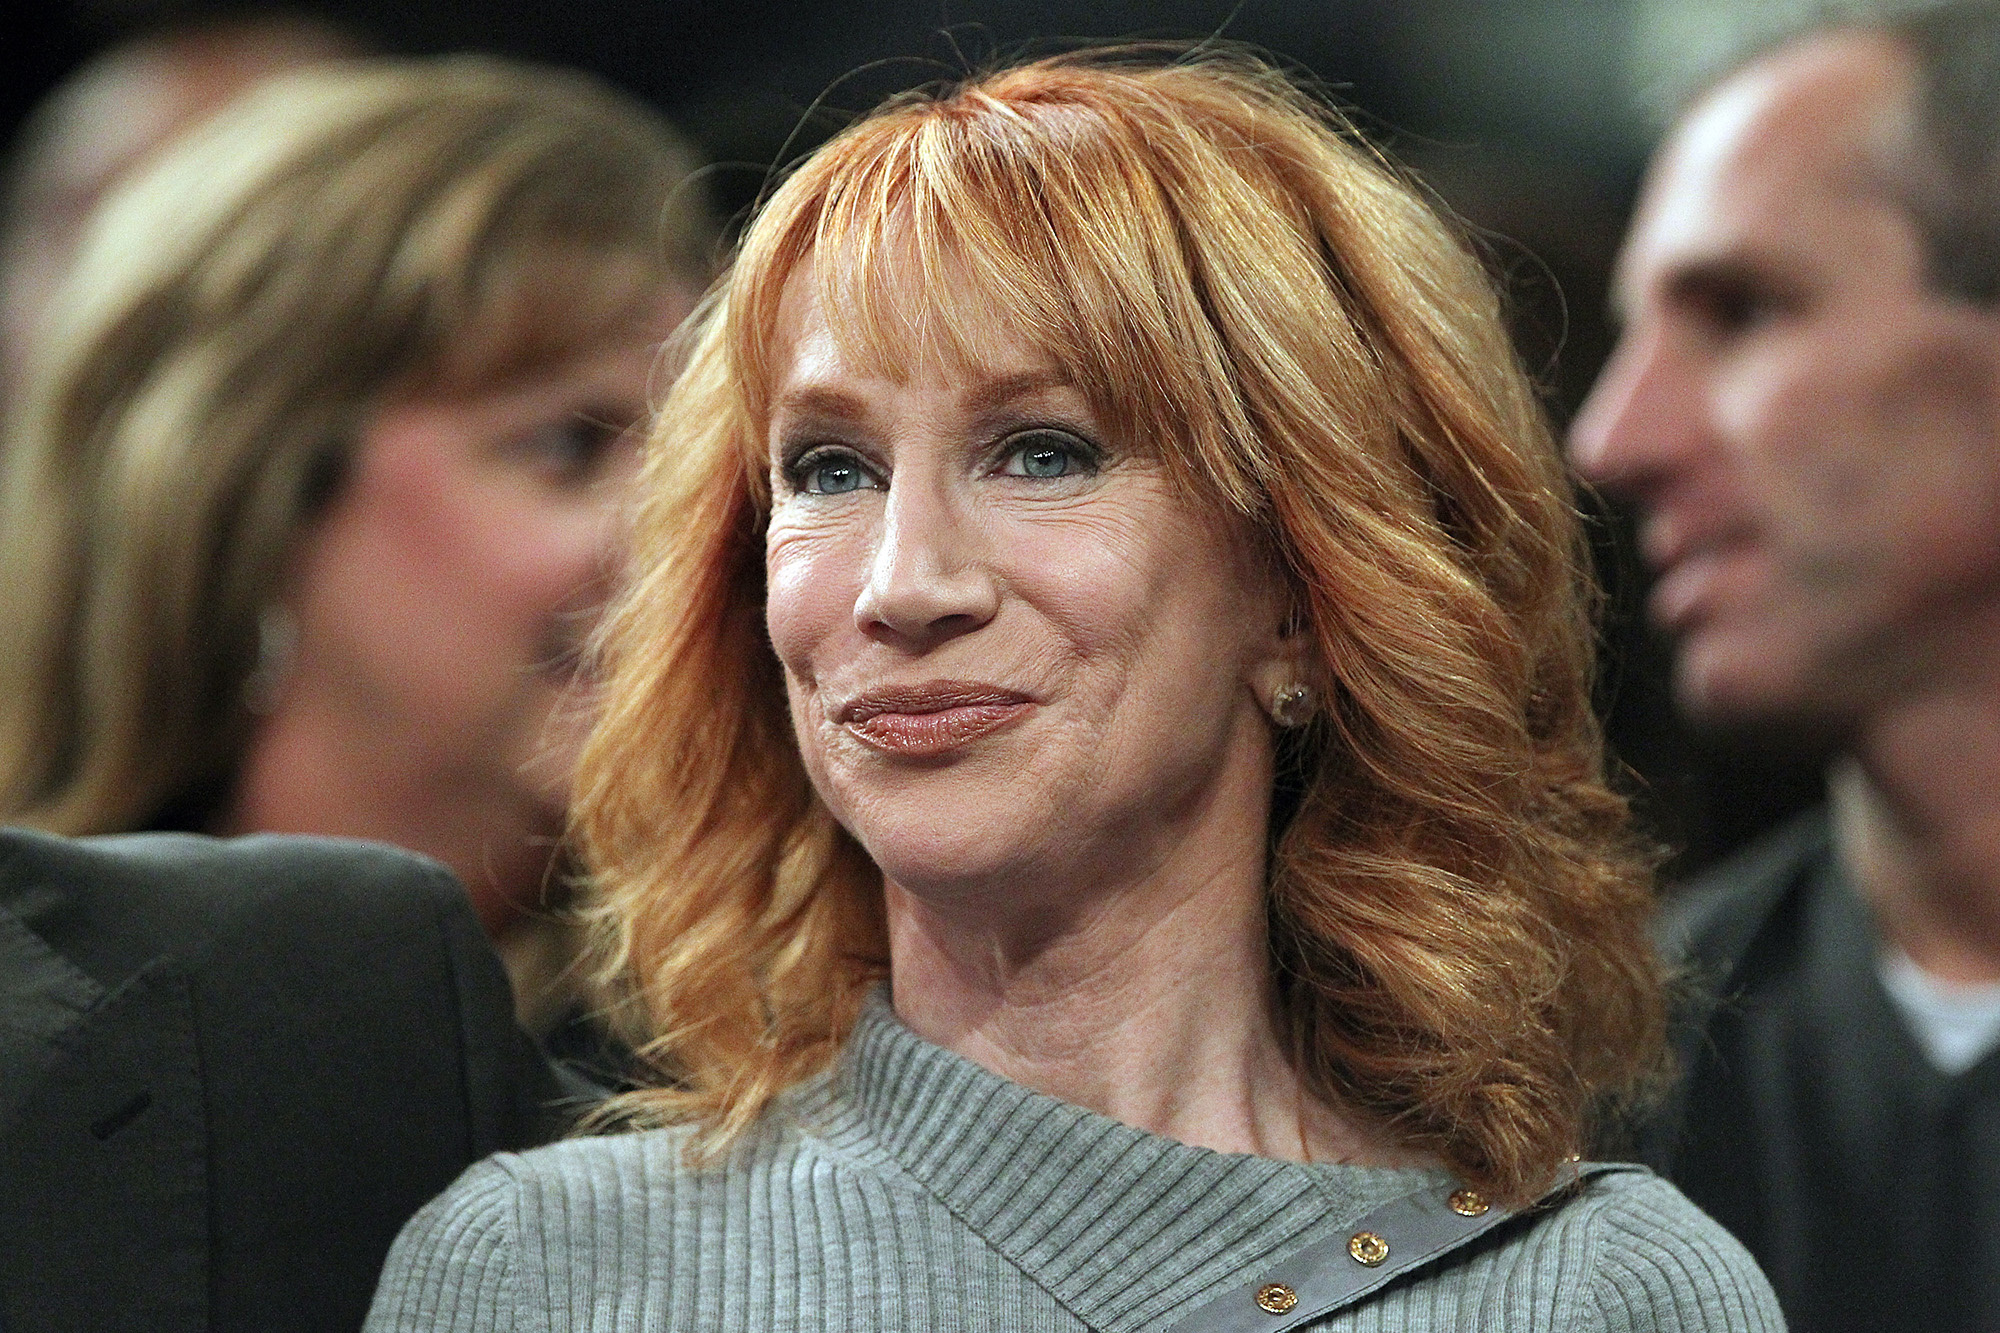 Kathy Griffin: A co-host of The View, 2007, Primetime Emmy Award. 2000x1340 HD Wallpaper.